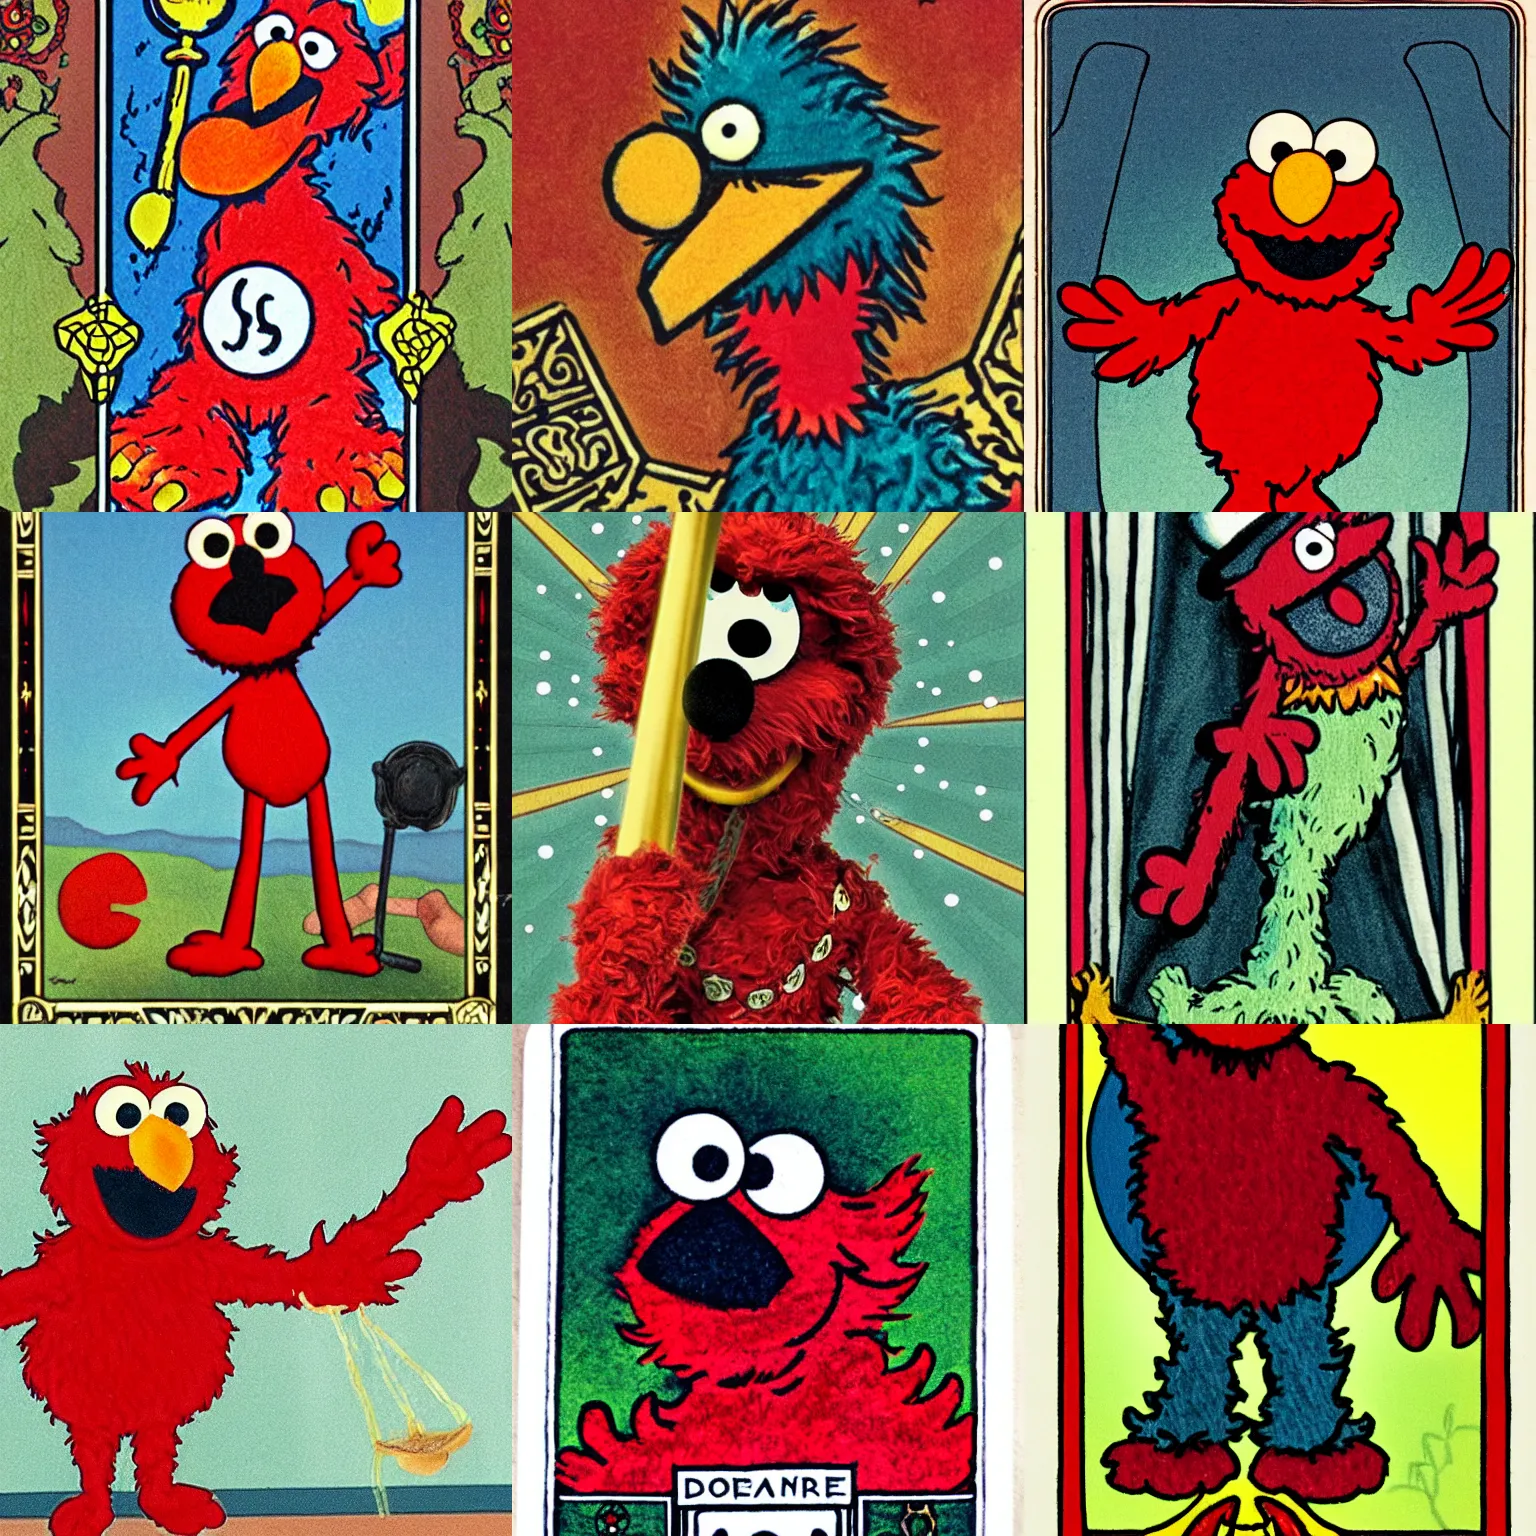 Prompt: tarot card depicting Elmo from Sesame Street as Death